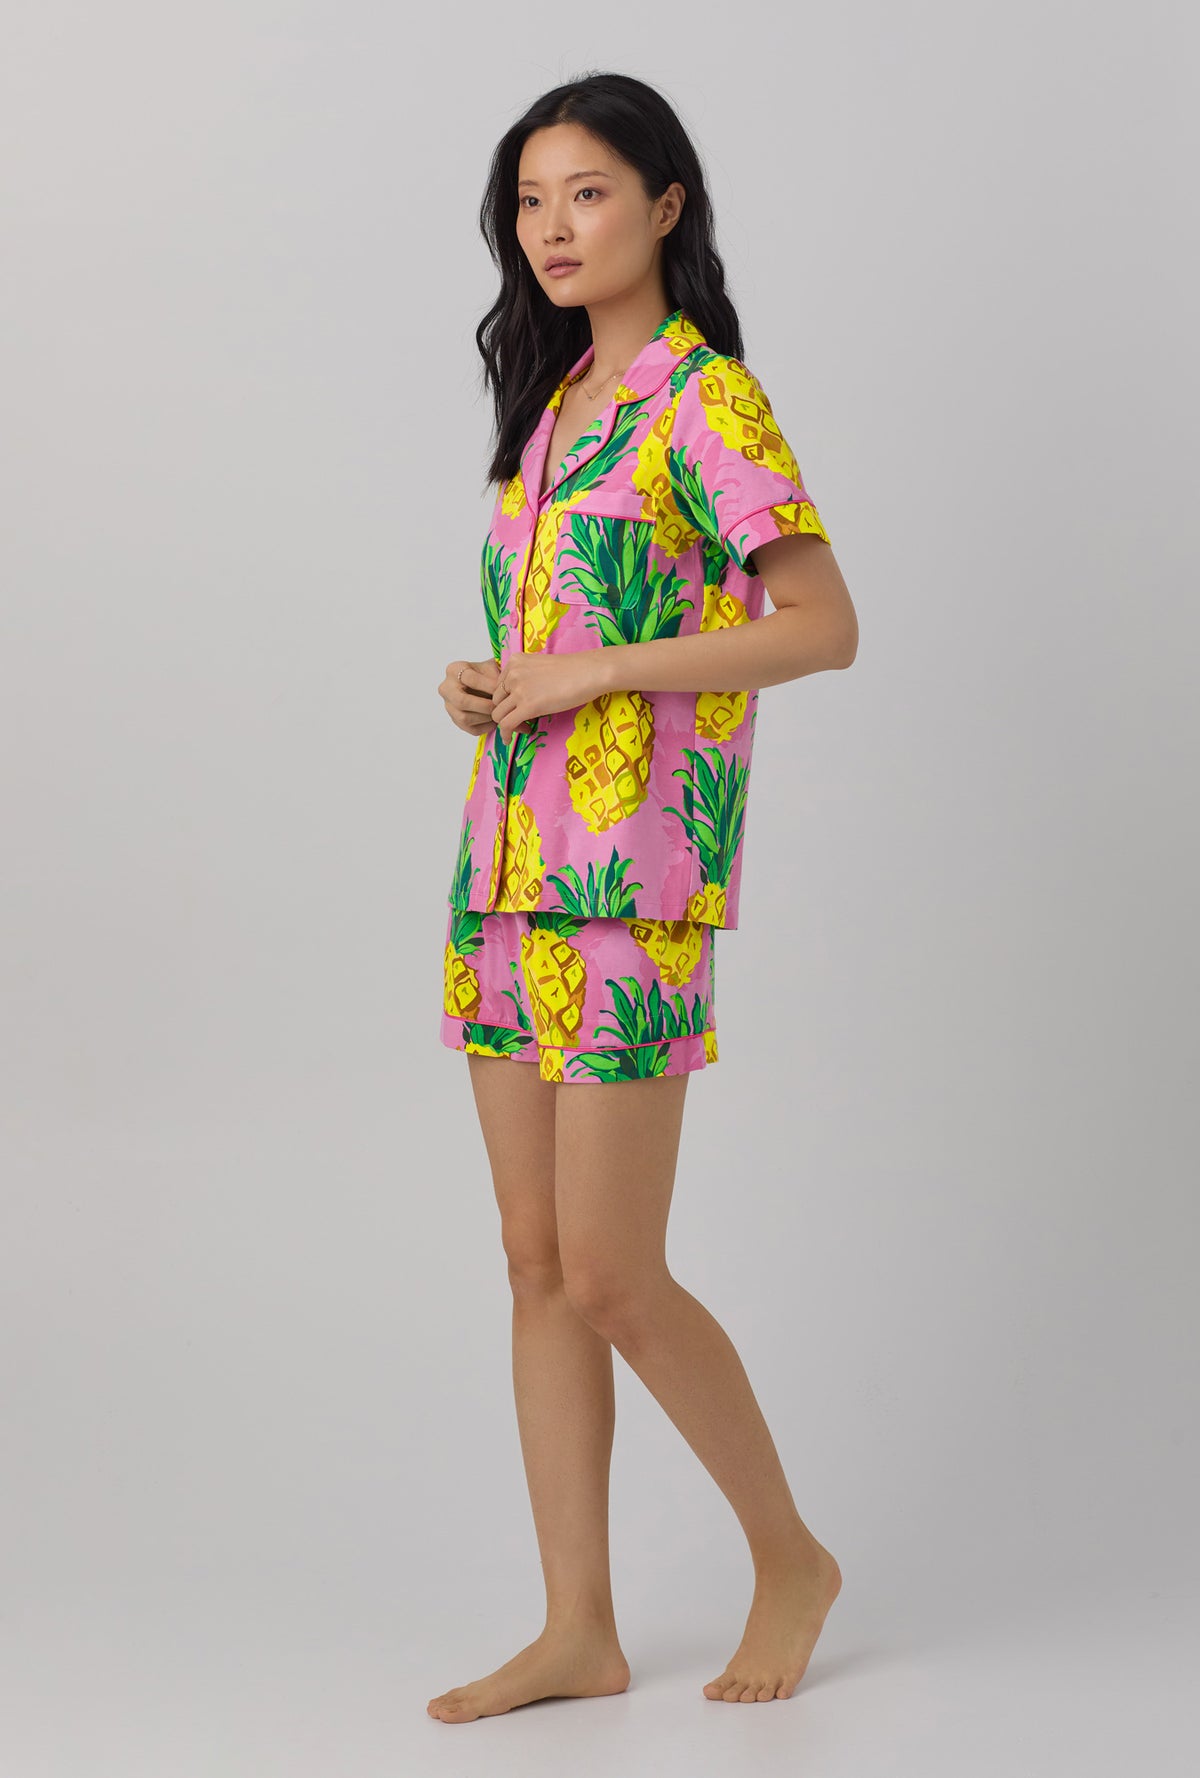 A lady wearing short sleeve classic shorty stretch jerset pj set with pineapple print